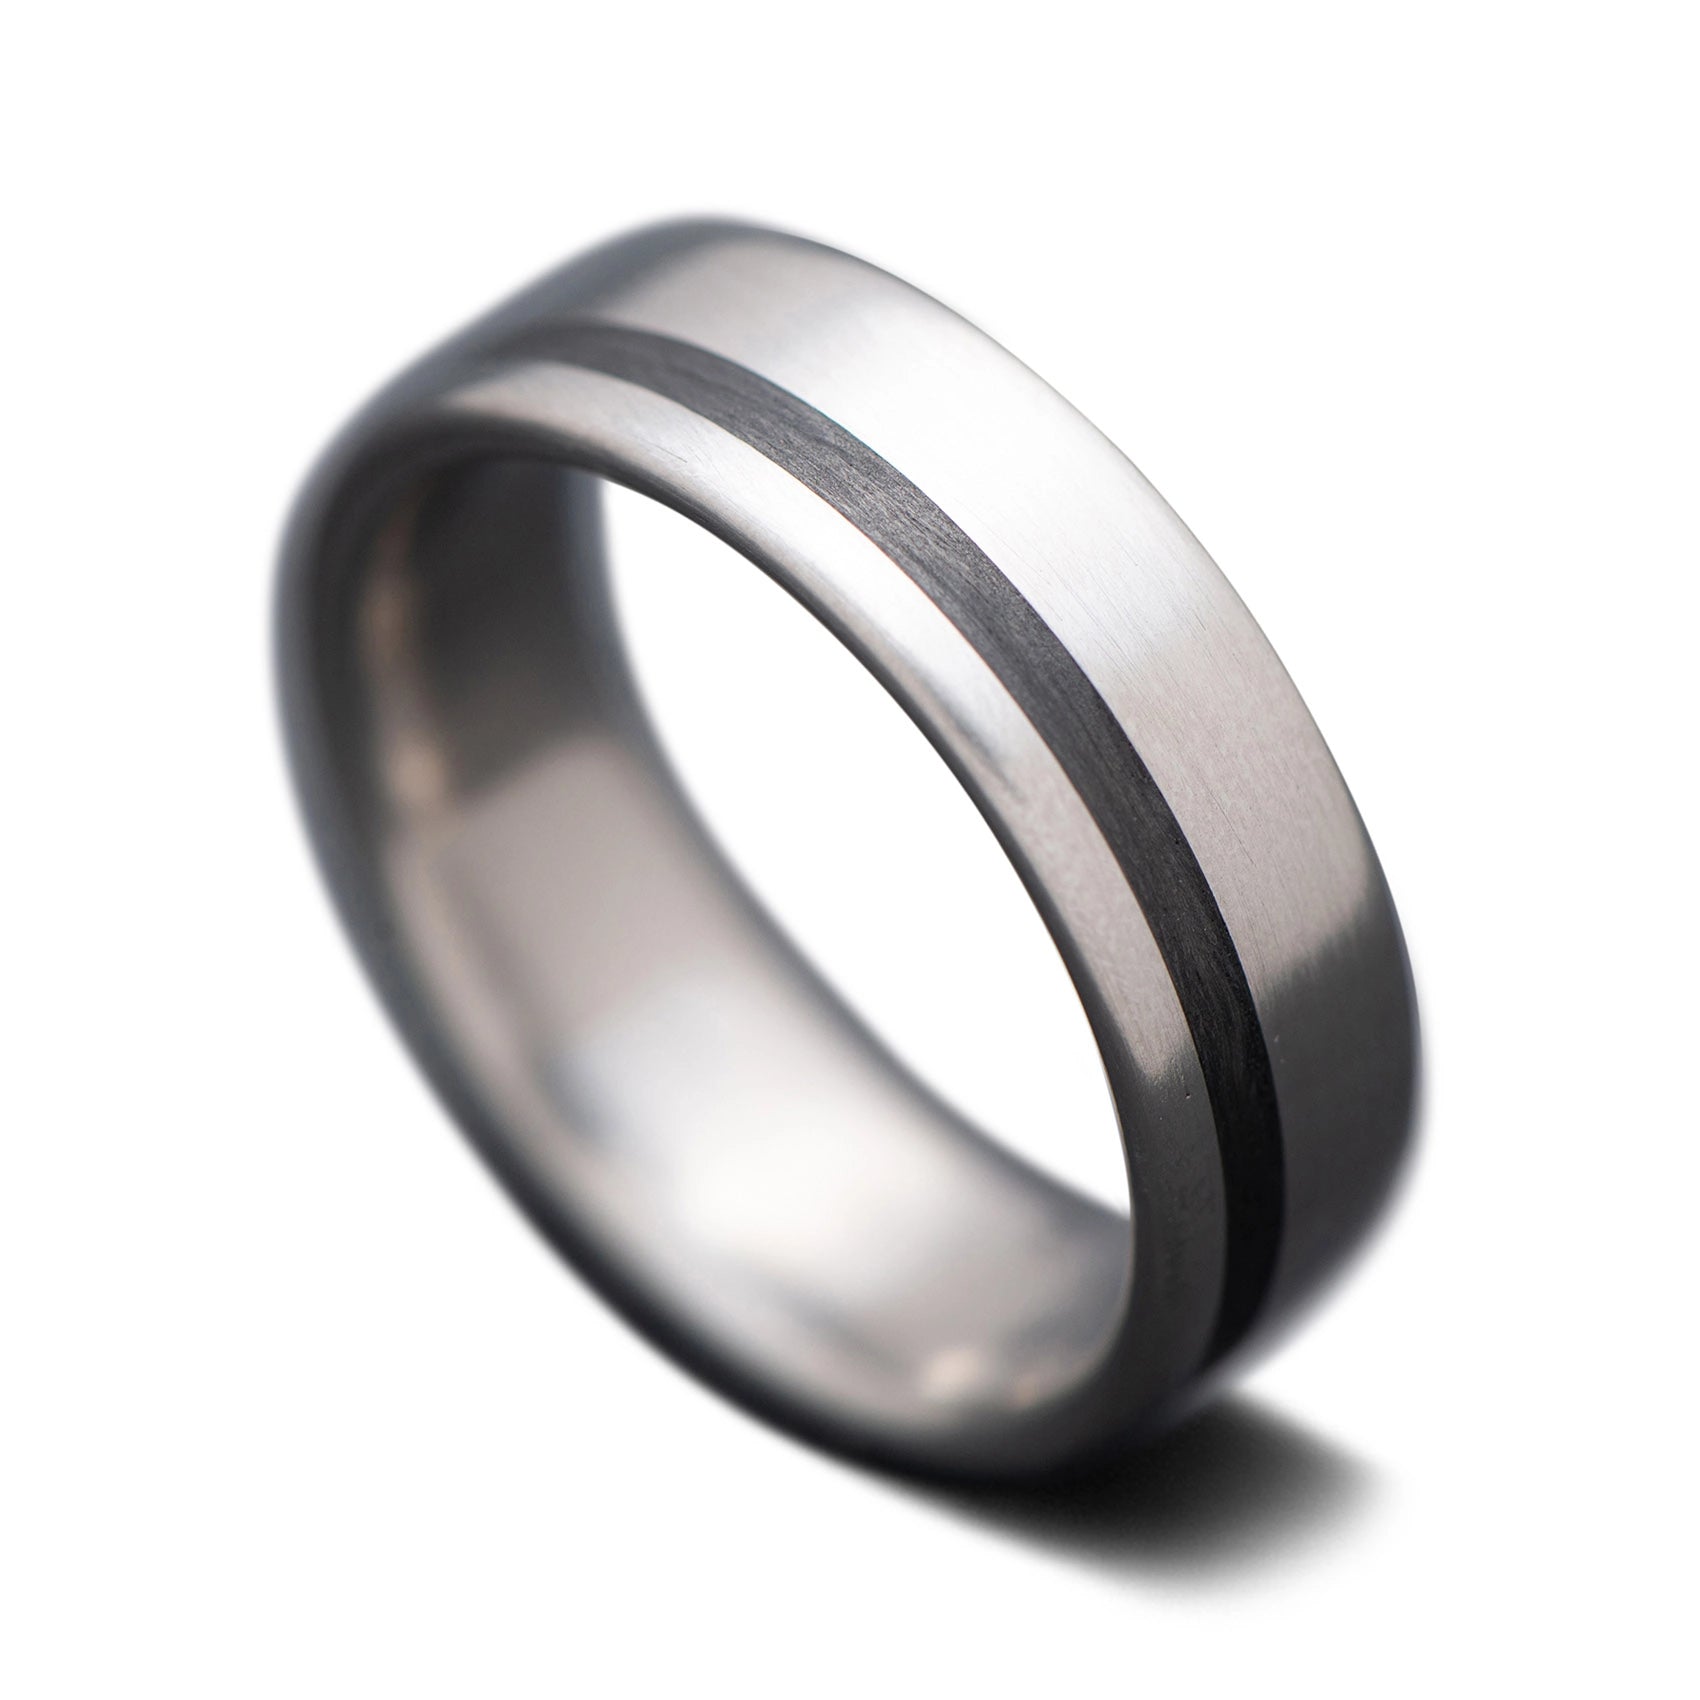 Titanium Core Ring with Unidirectional inlay, 7mm -THE SHIFT